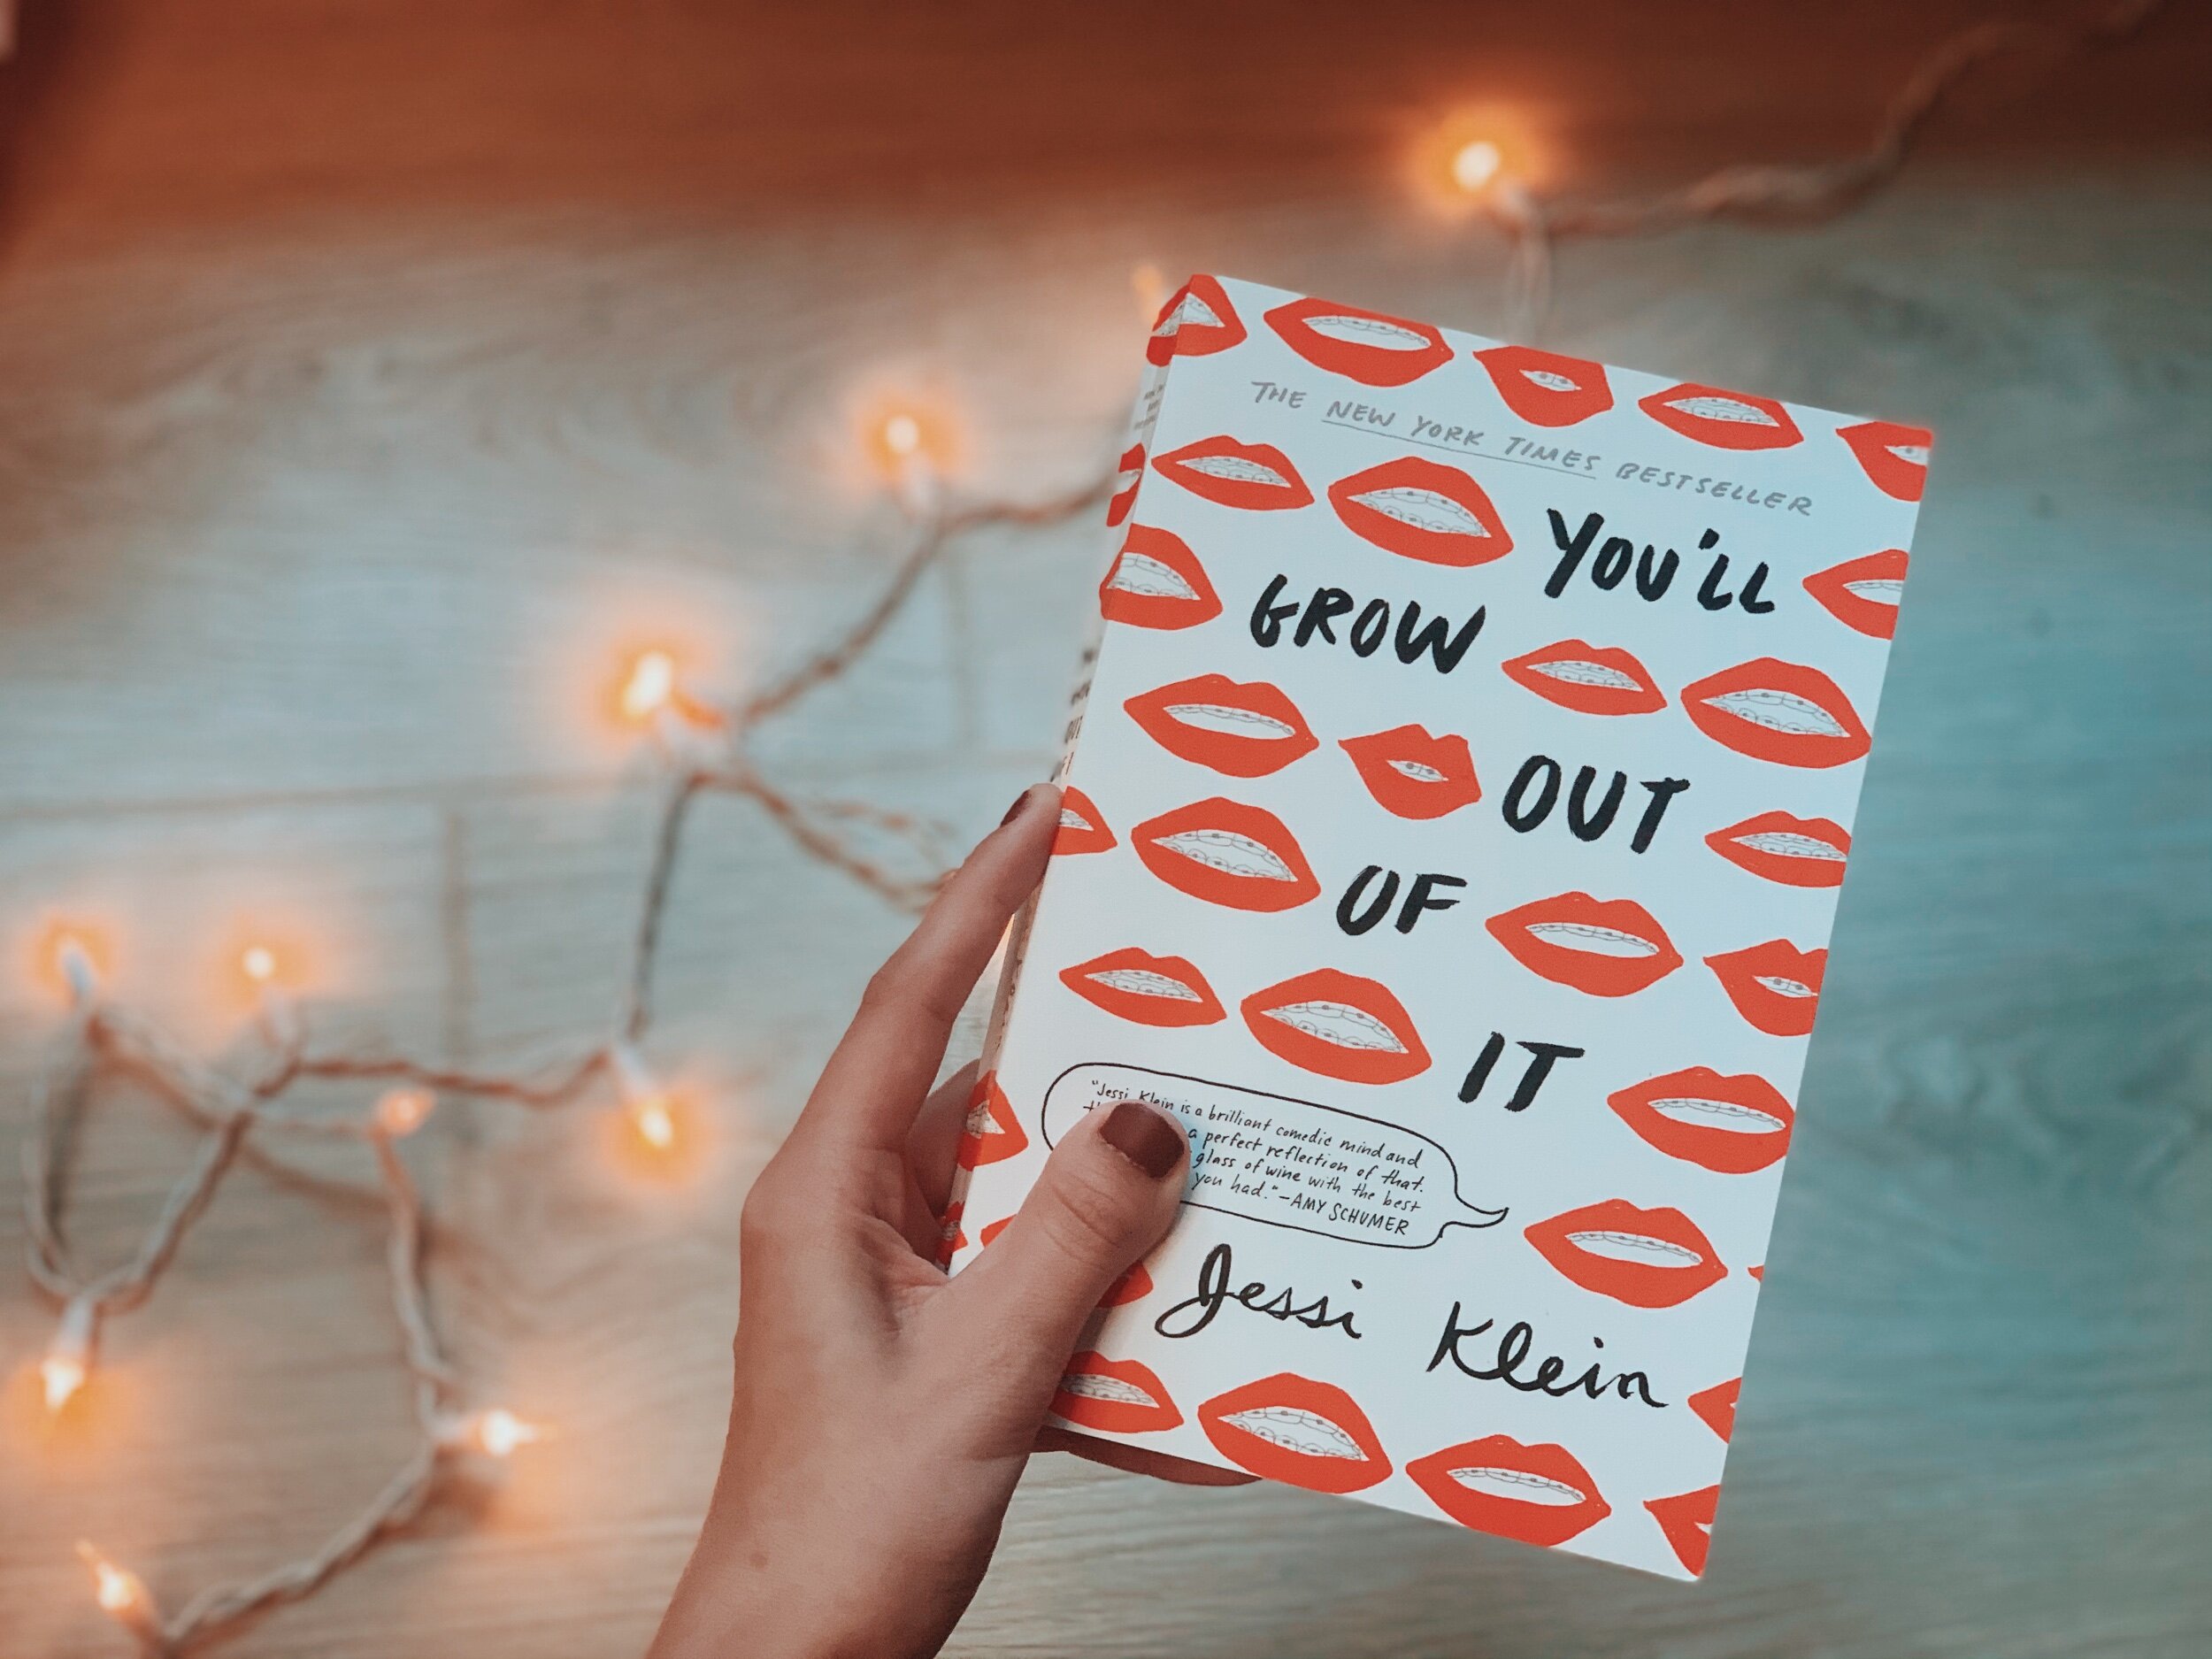 The book You’ll Grow Out of It by Jessi Klein is held up against a light wooden background with a strand of warm twinkly lights in the background it.